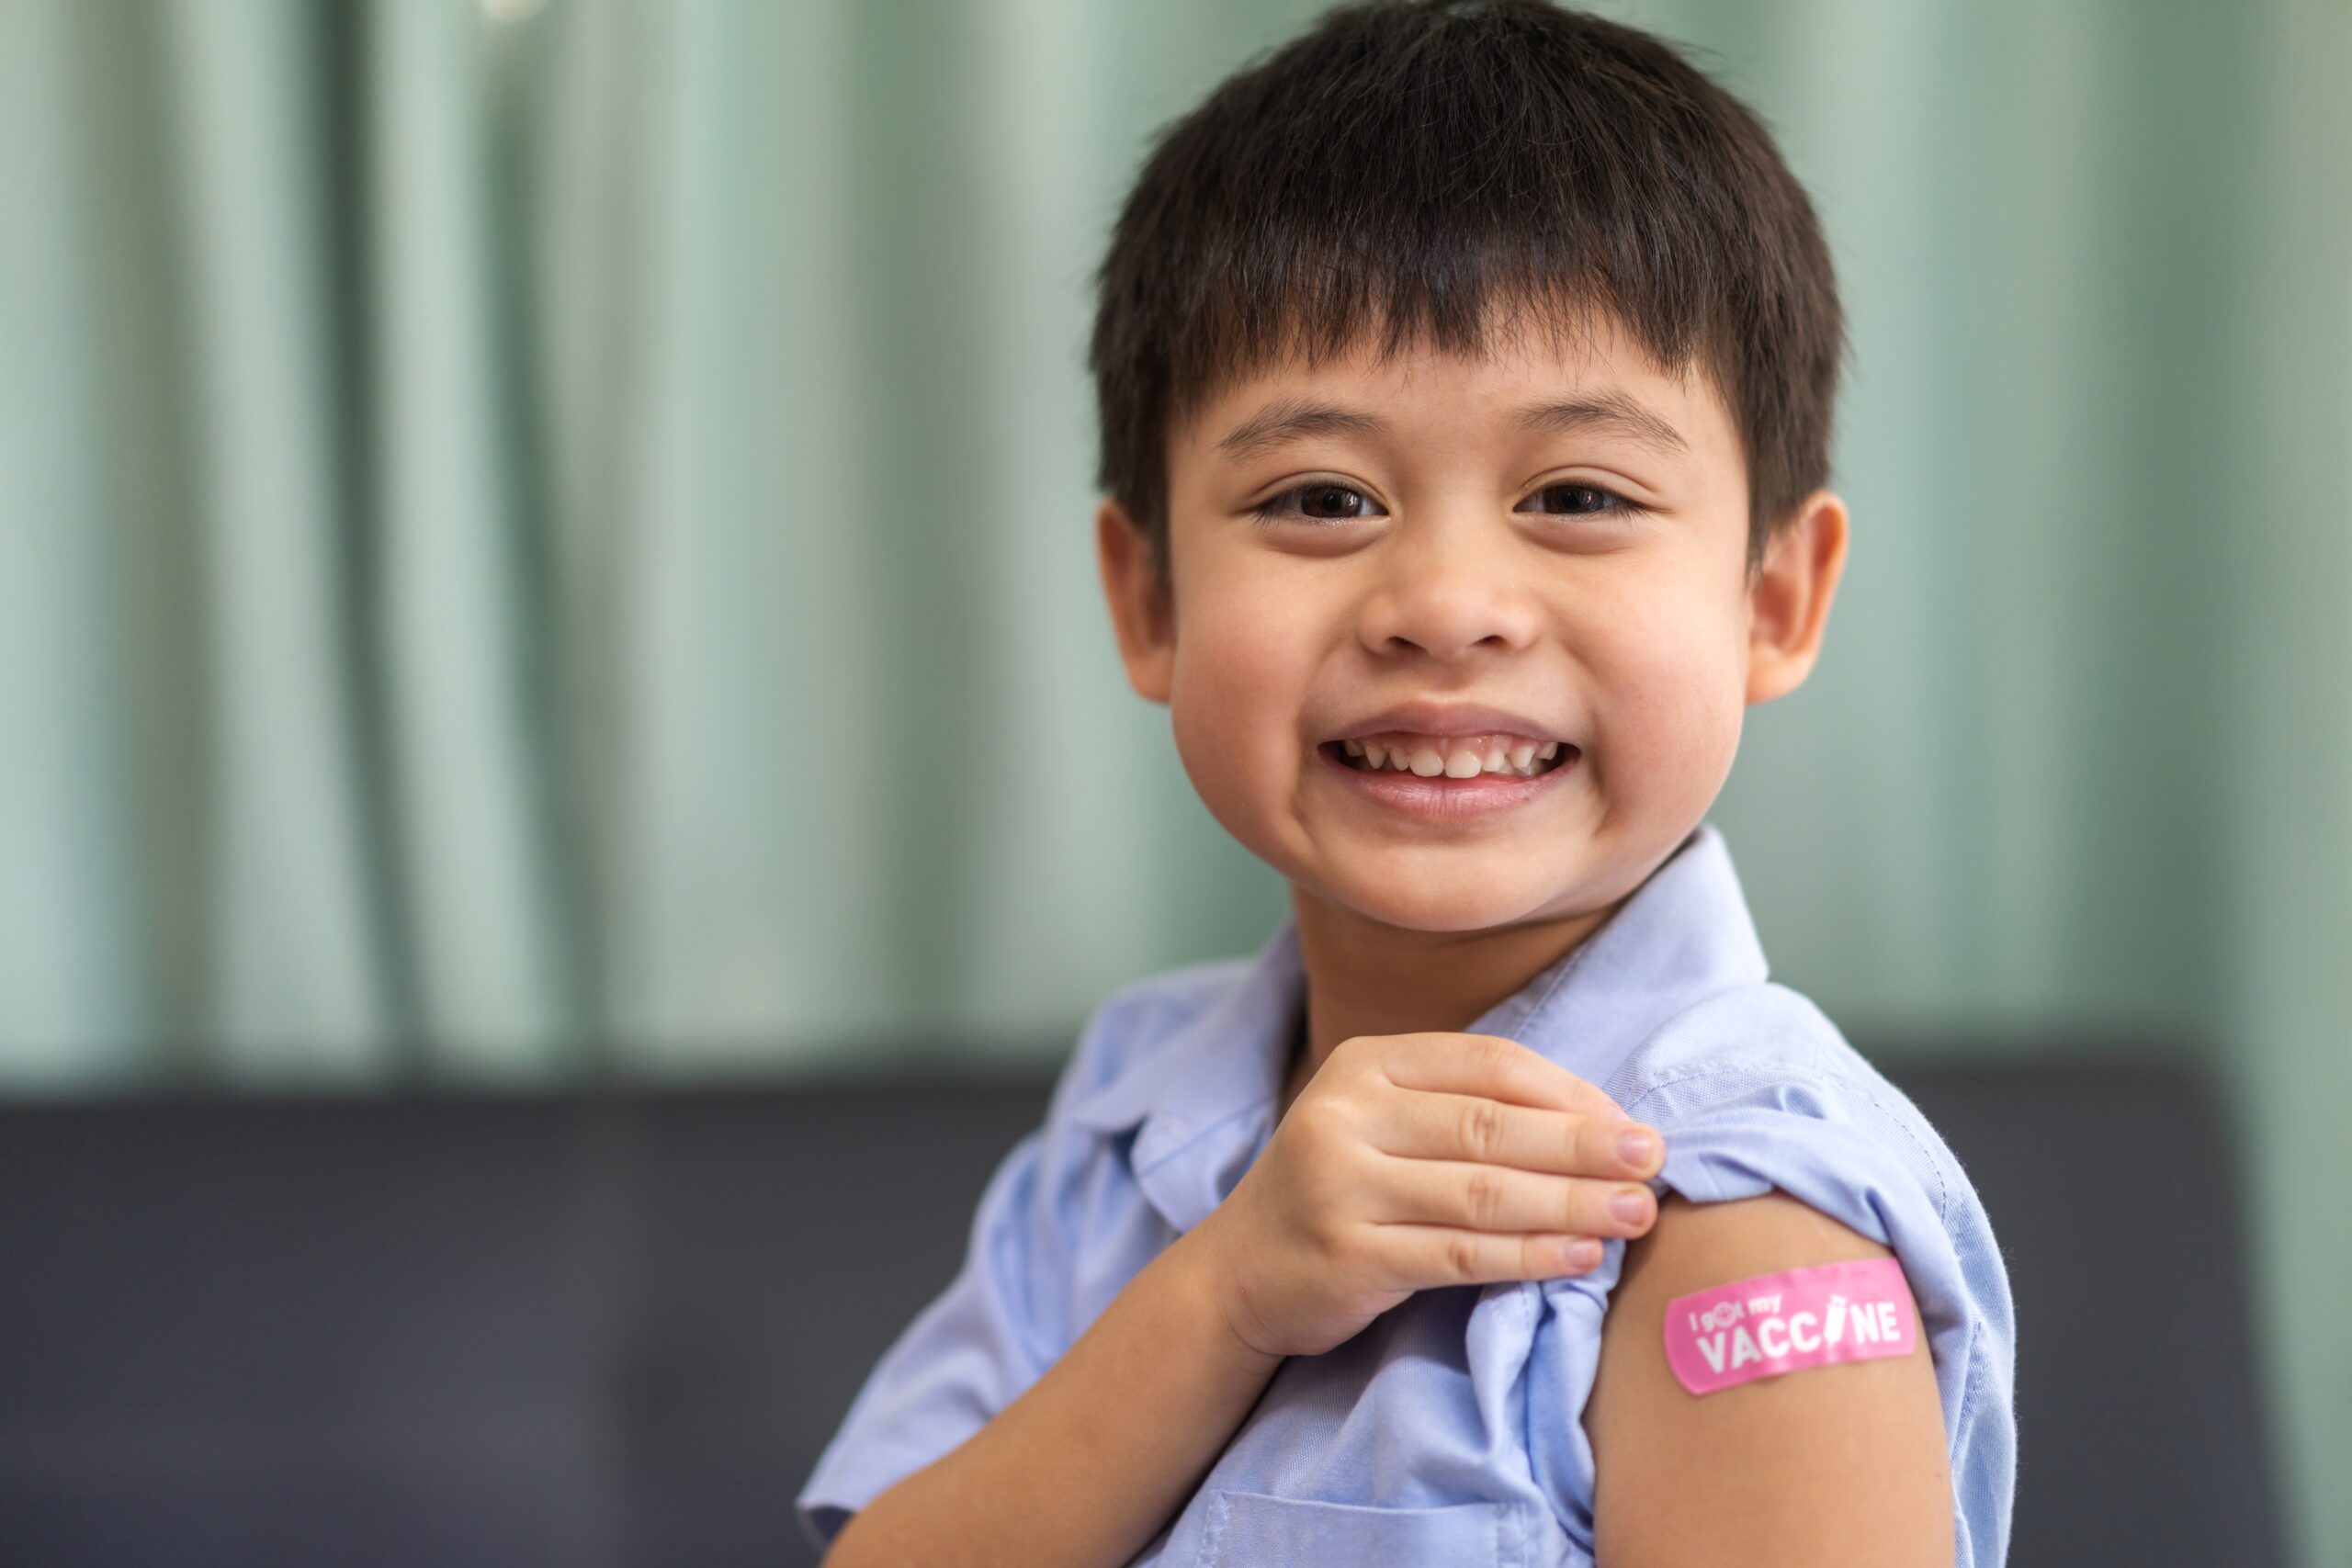 Young boy smiling and showing off bandage after a vaccine